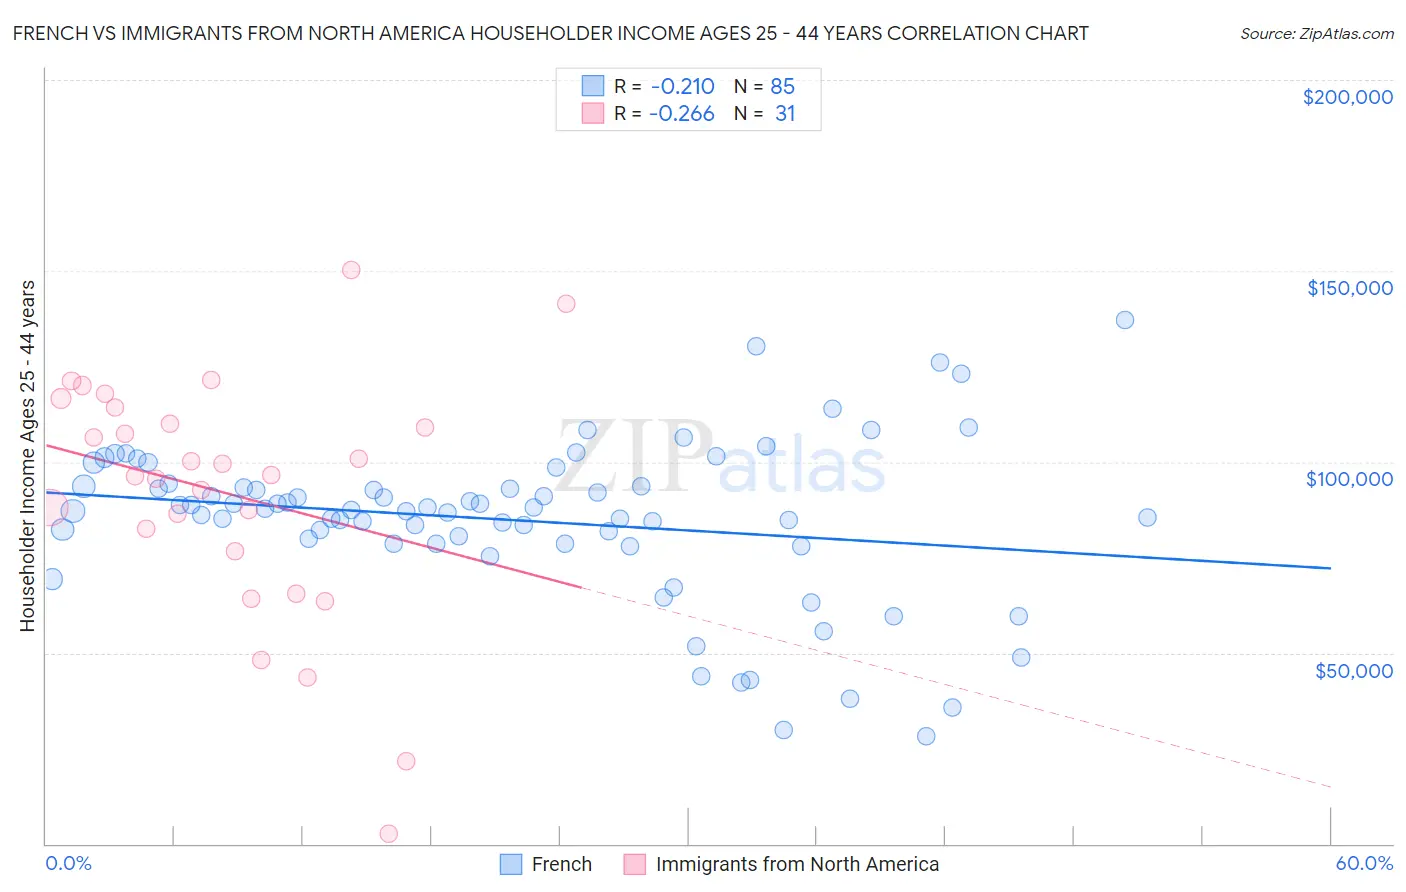 French vs Immigrants from North America Householder Income Ages 25 - 44 years